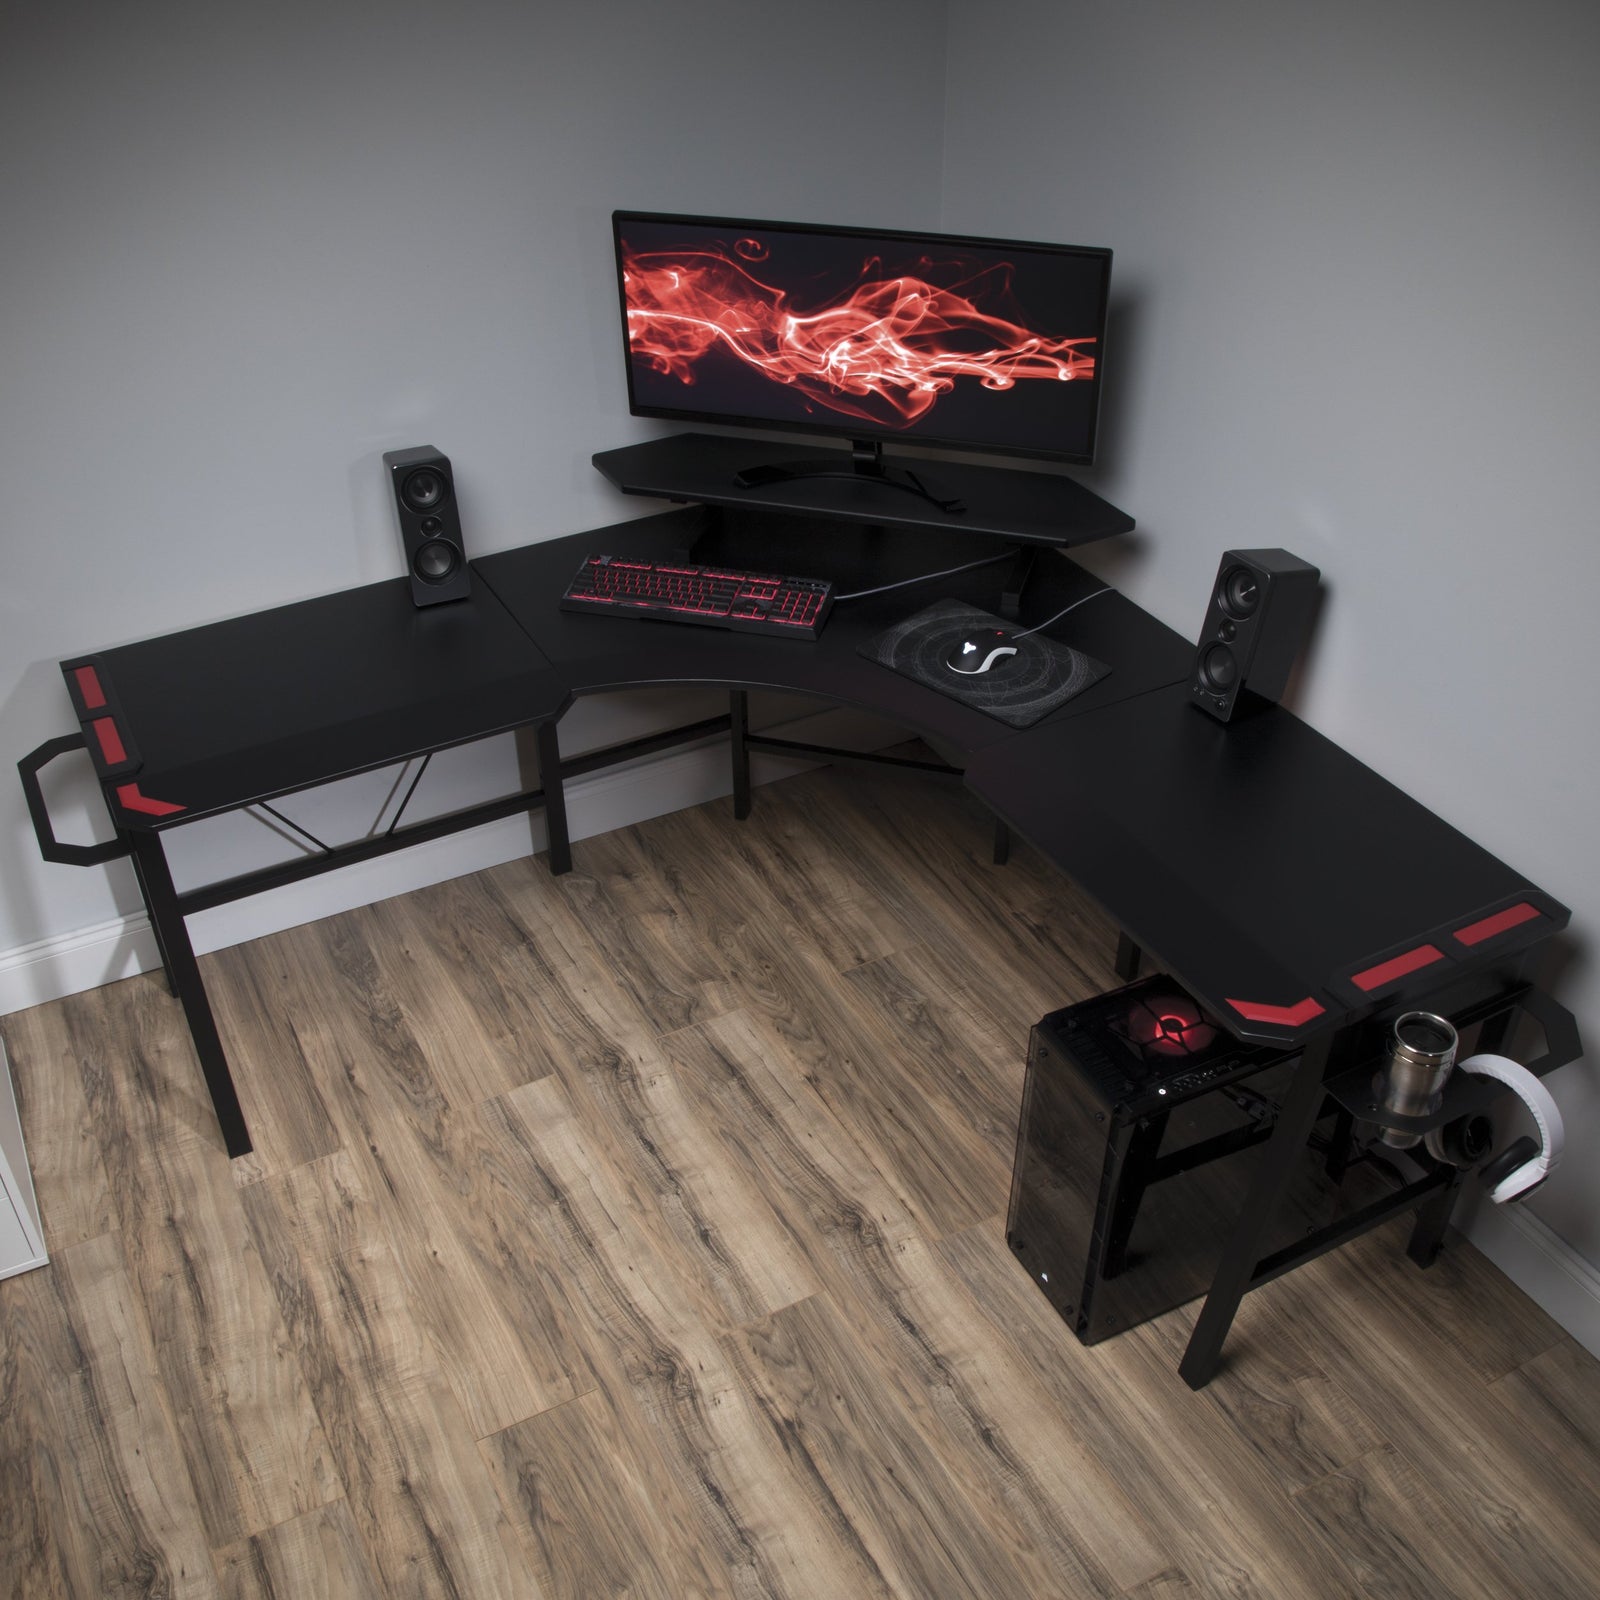 DIY Where To Buy Gaming Desk In Store for Streaming